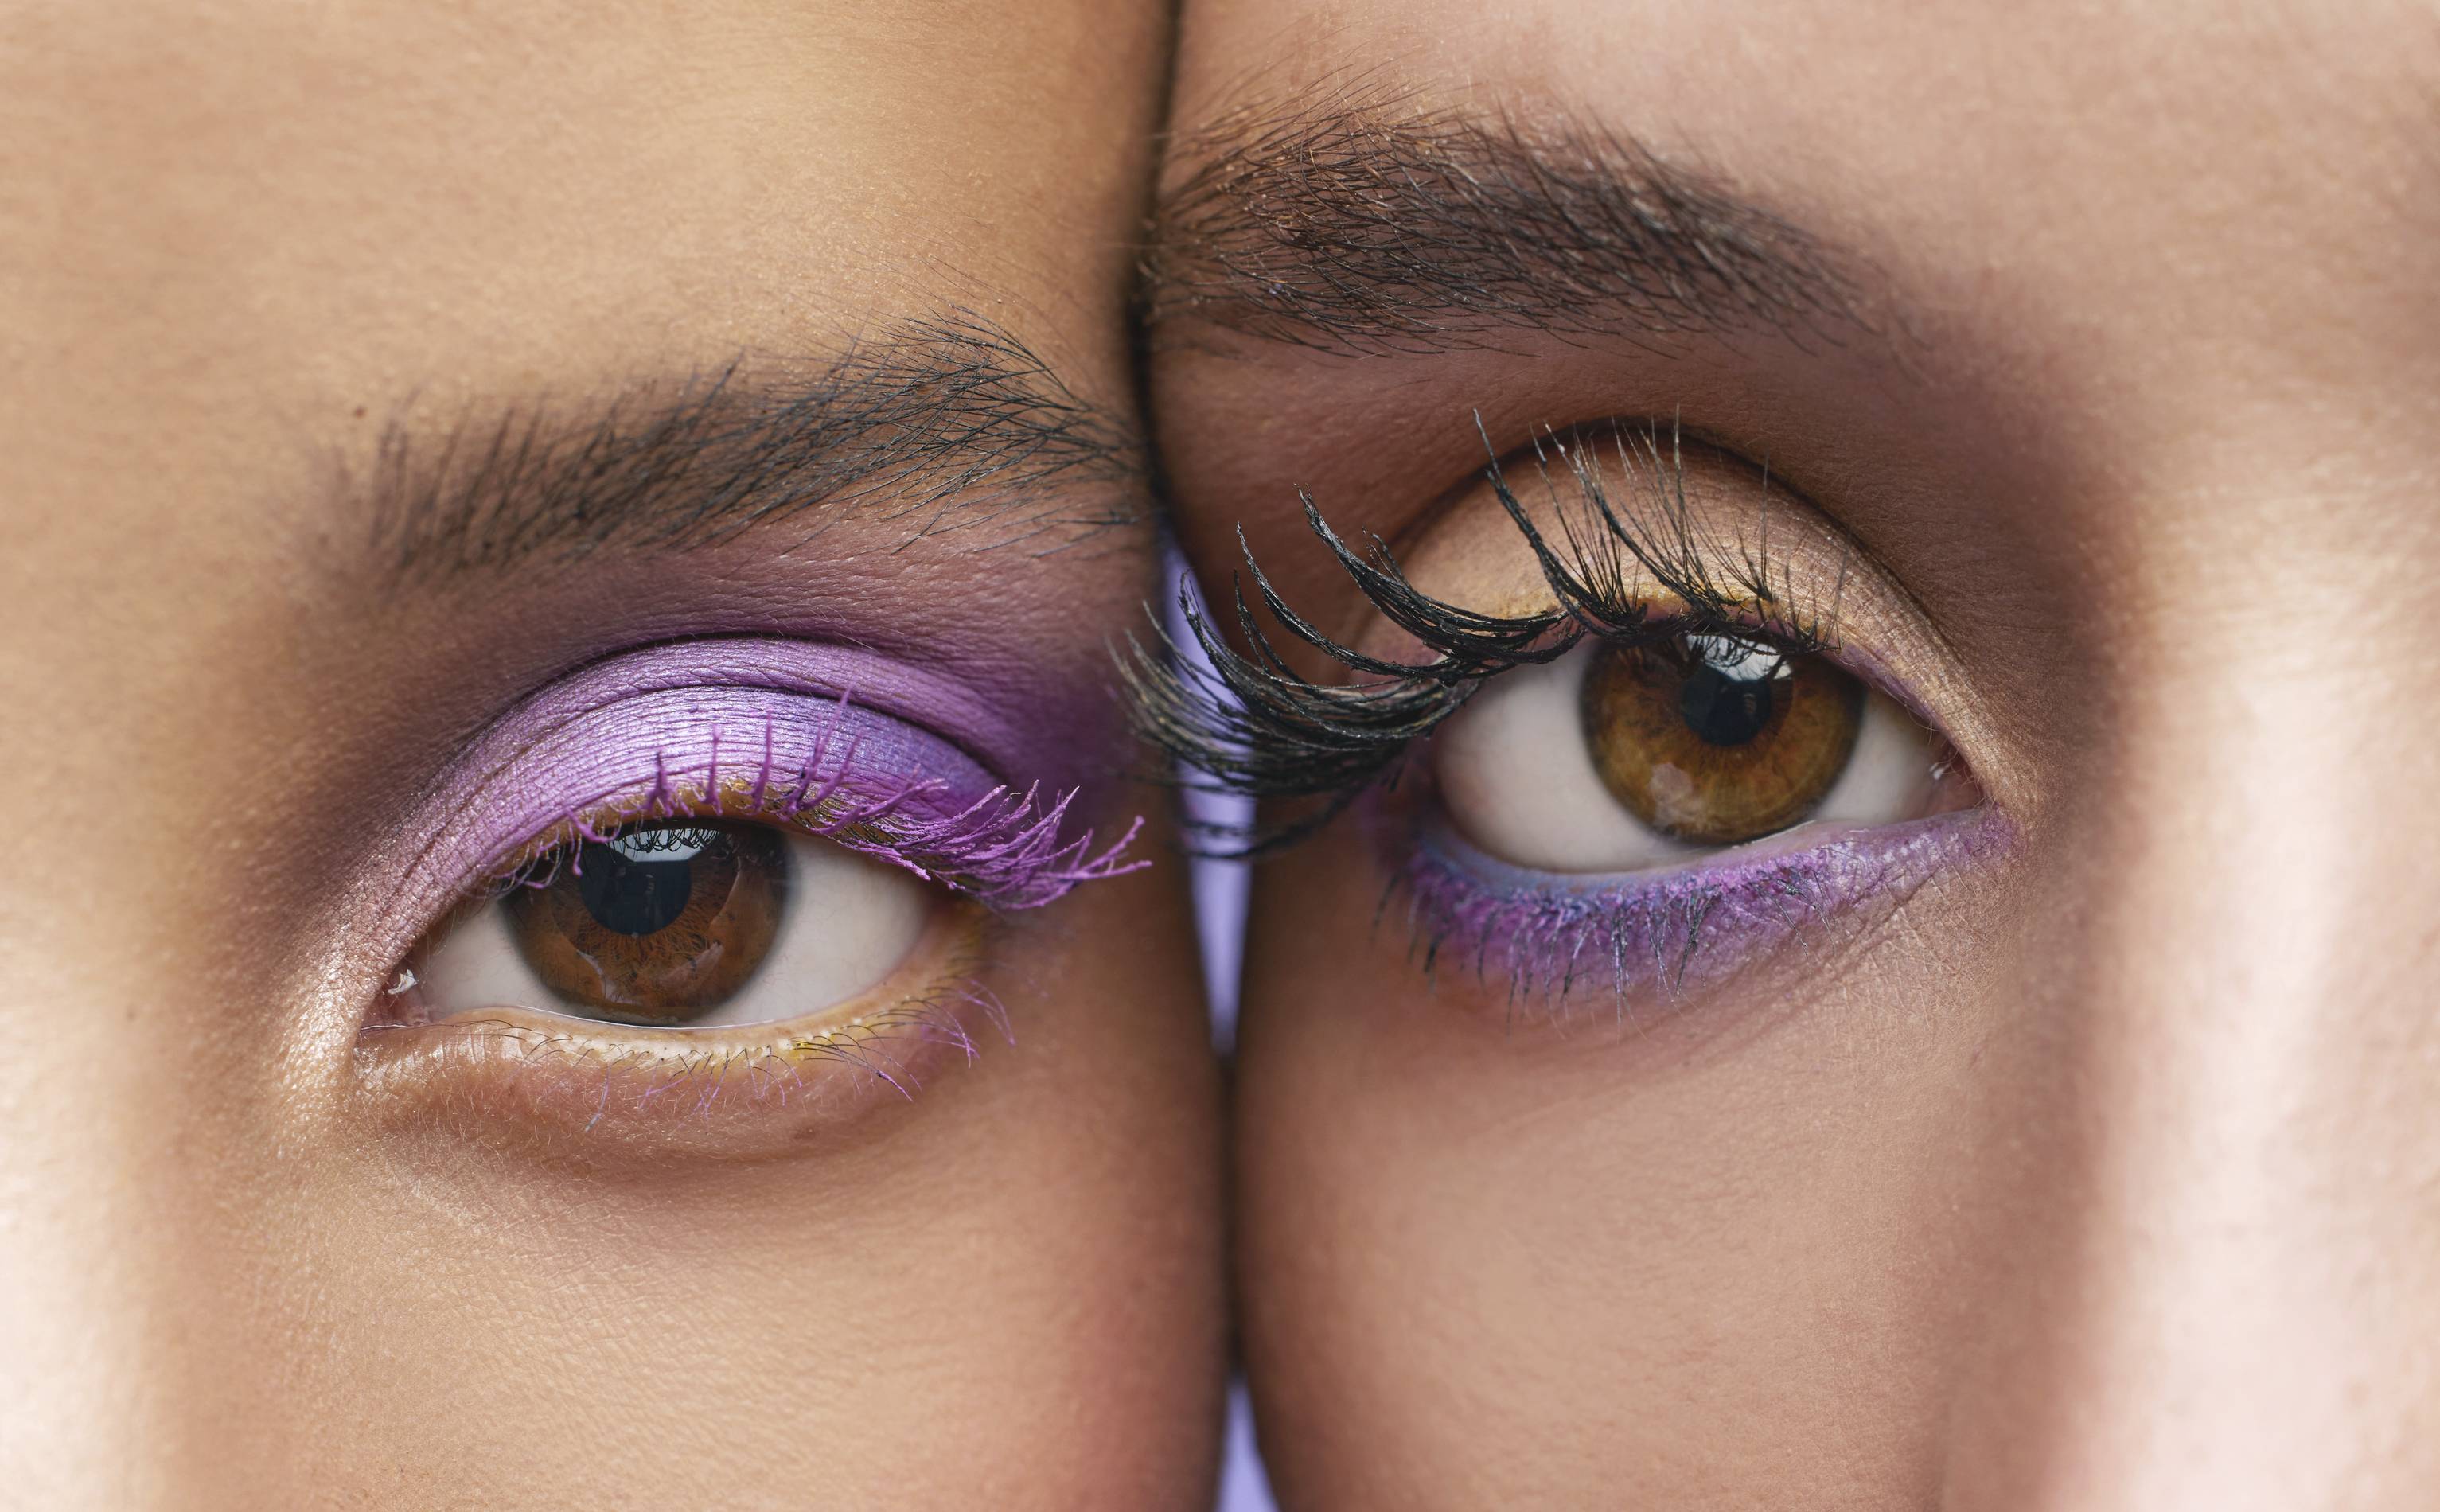 makeup models show off their colorful eyeshadow